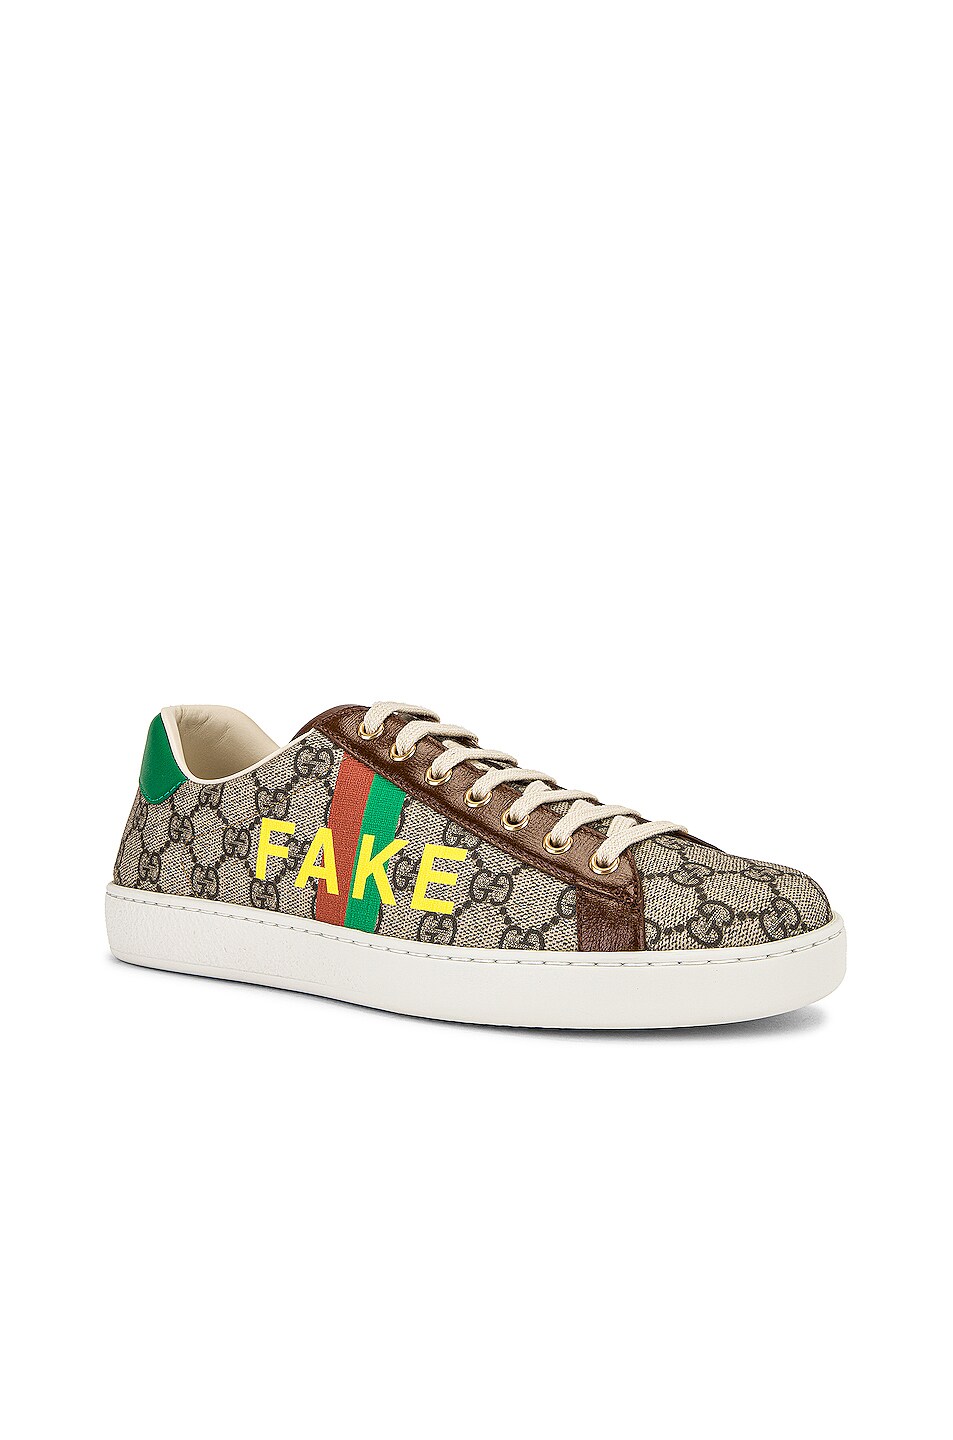 Image 1 of Gucci GG Supreme Sneaker in Beige & Green & Red & Brown